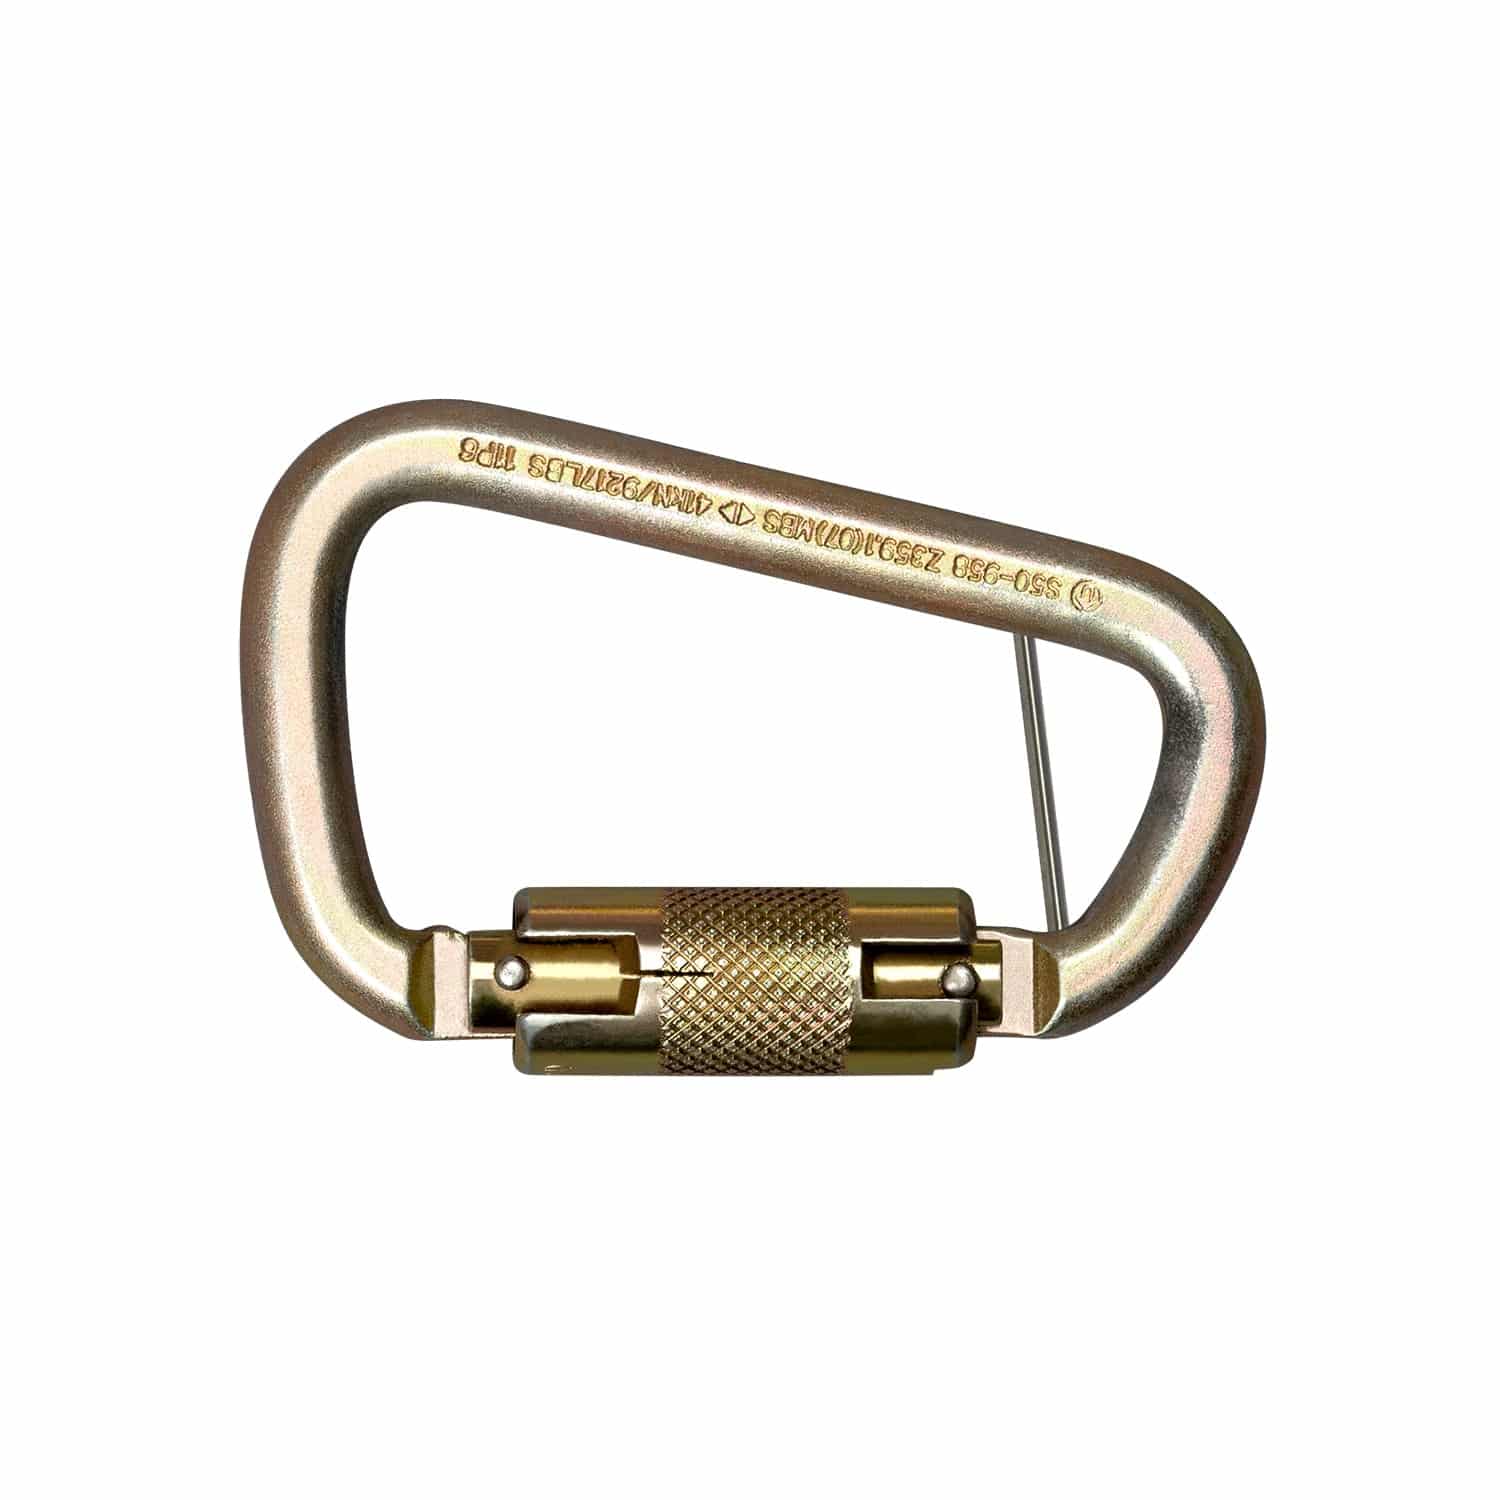 Buckingham 5005T Steel Pin - Carabiner - with Manufacturing Holes Twist Lock Captive